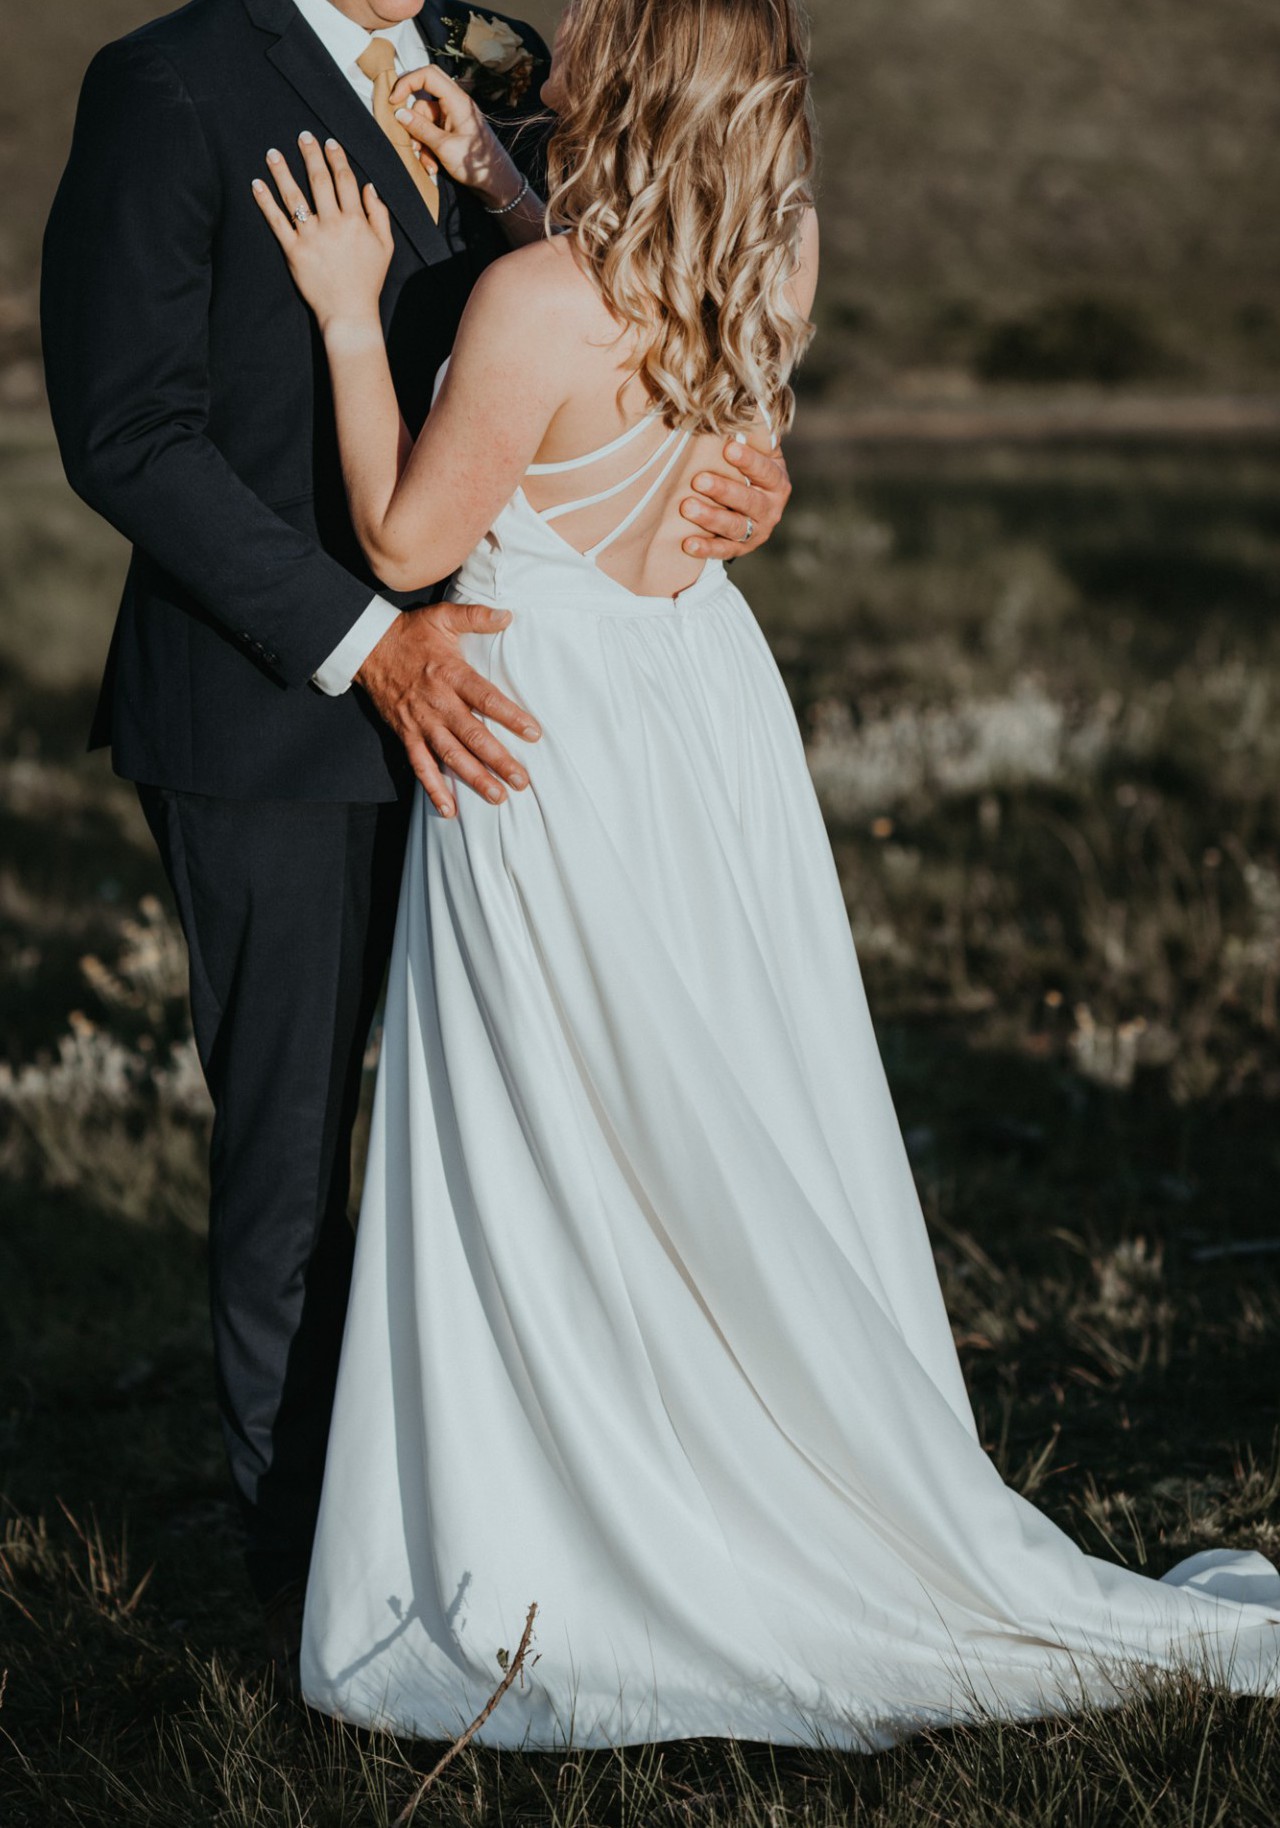 where to sell used wedding dress